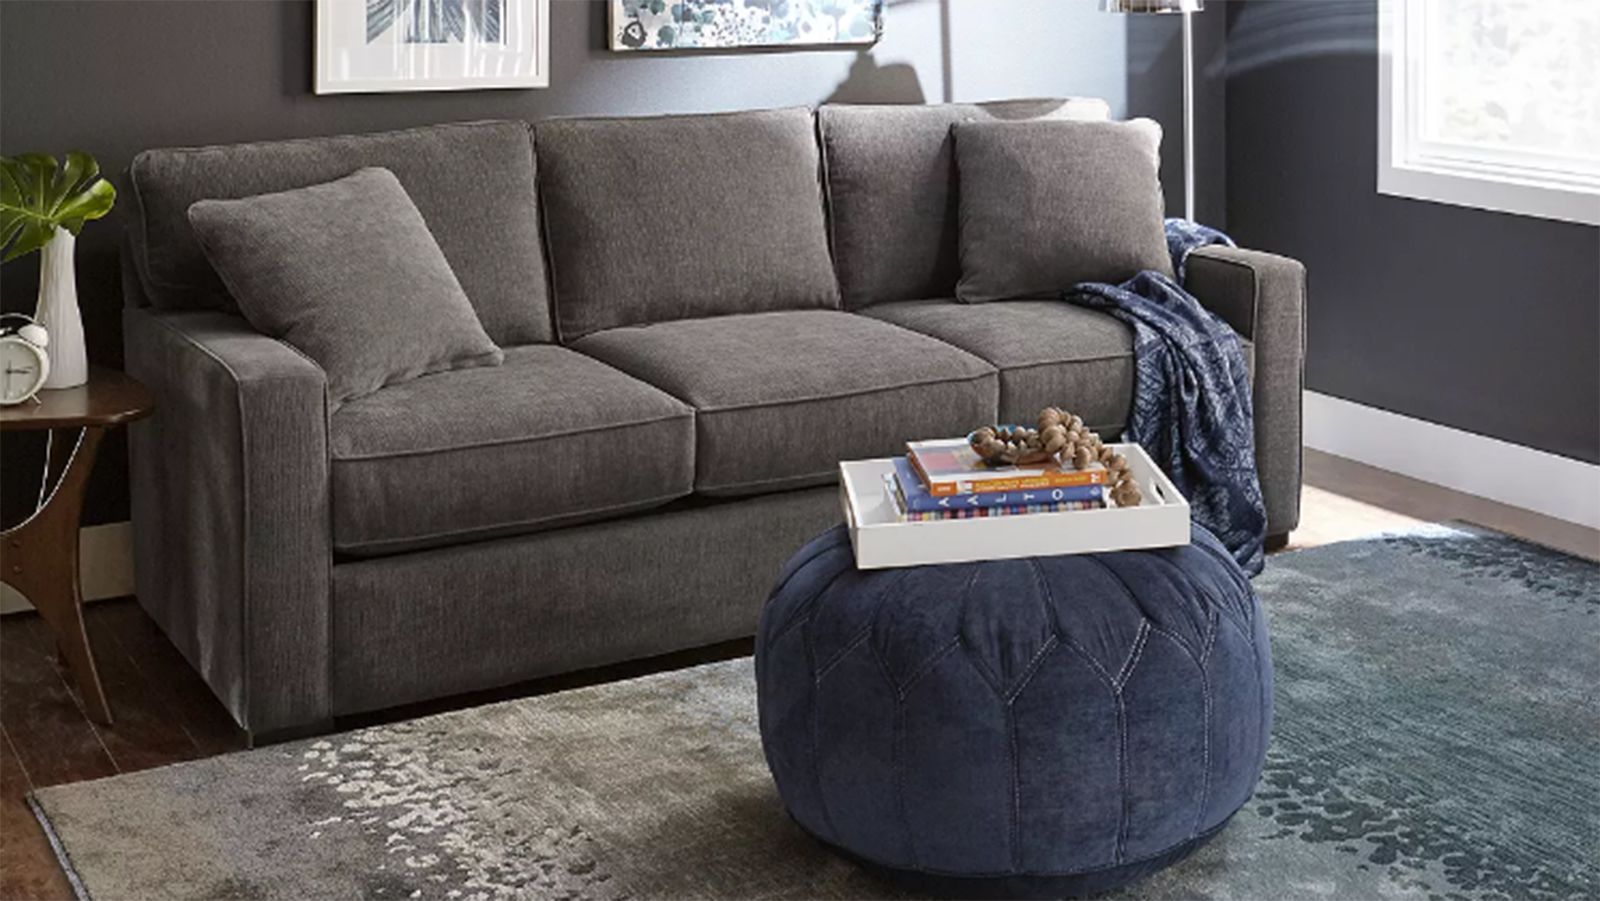 15 Best Sleeper Sofas Sofa Beds And